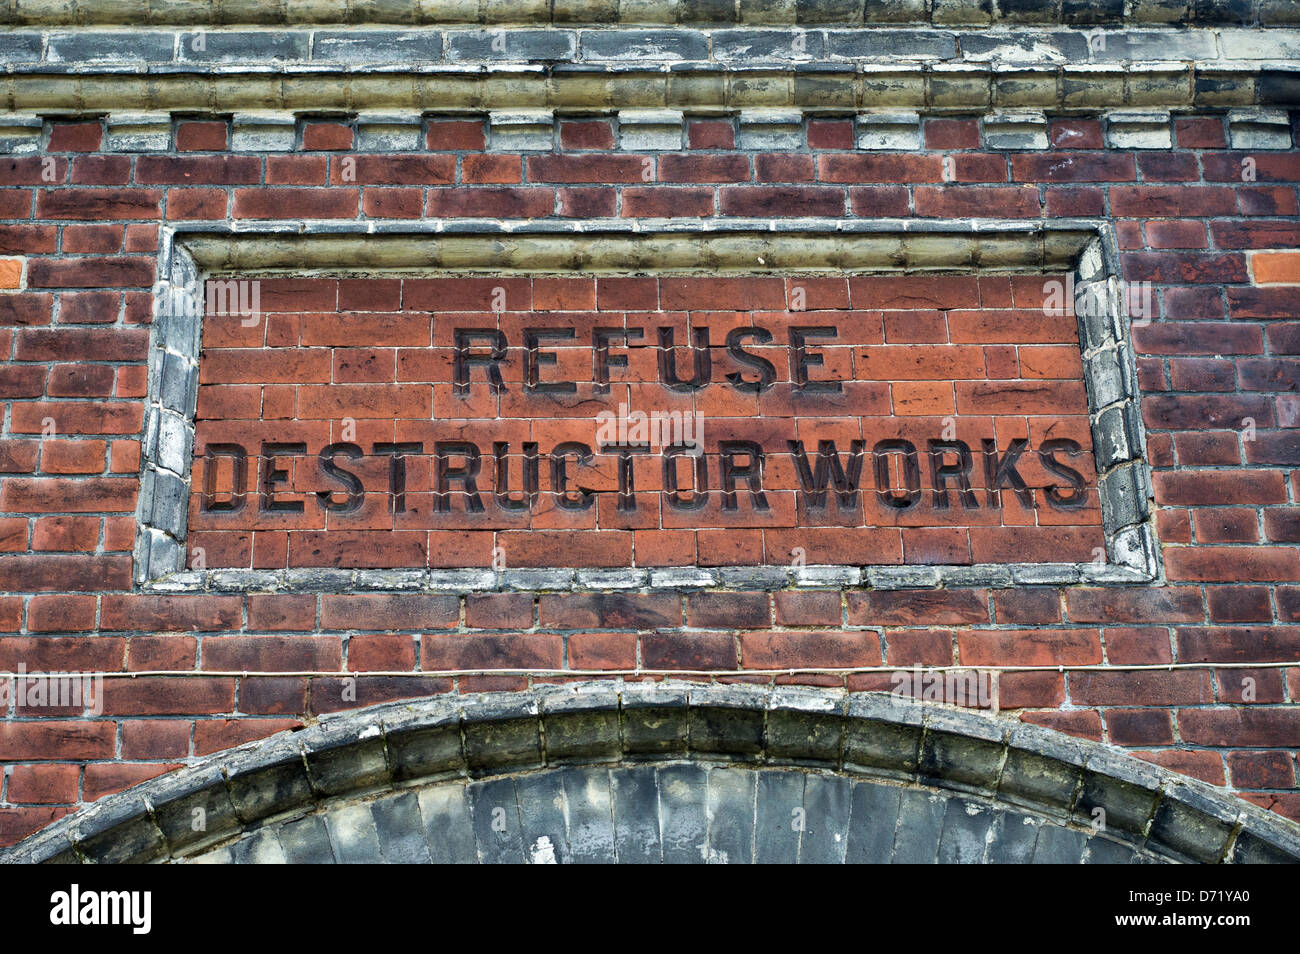 The words Refuse Destructor Works chiseled into brickworks of an old public utility building. Stock Photo